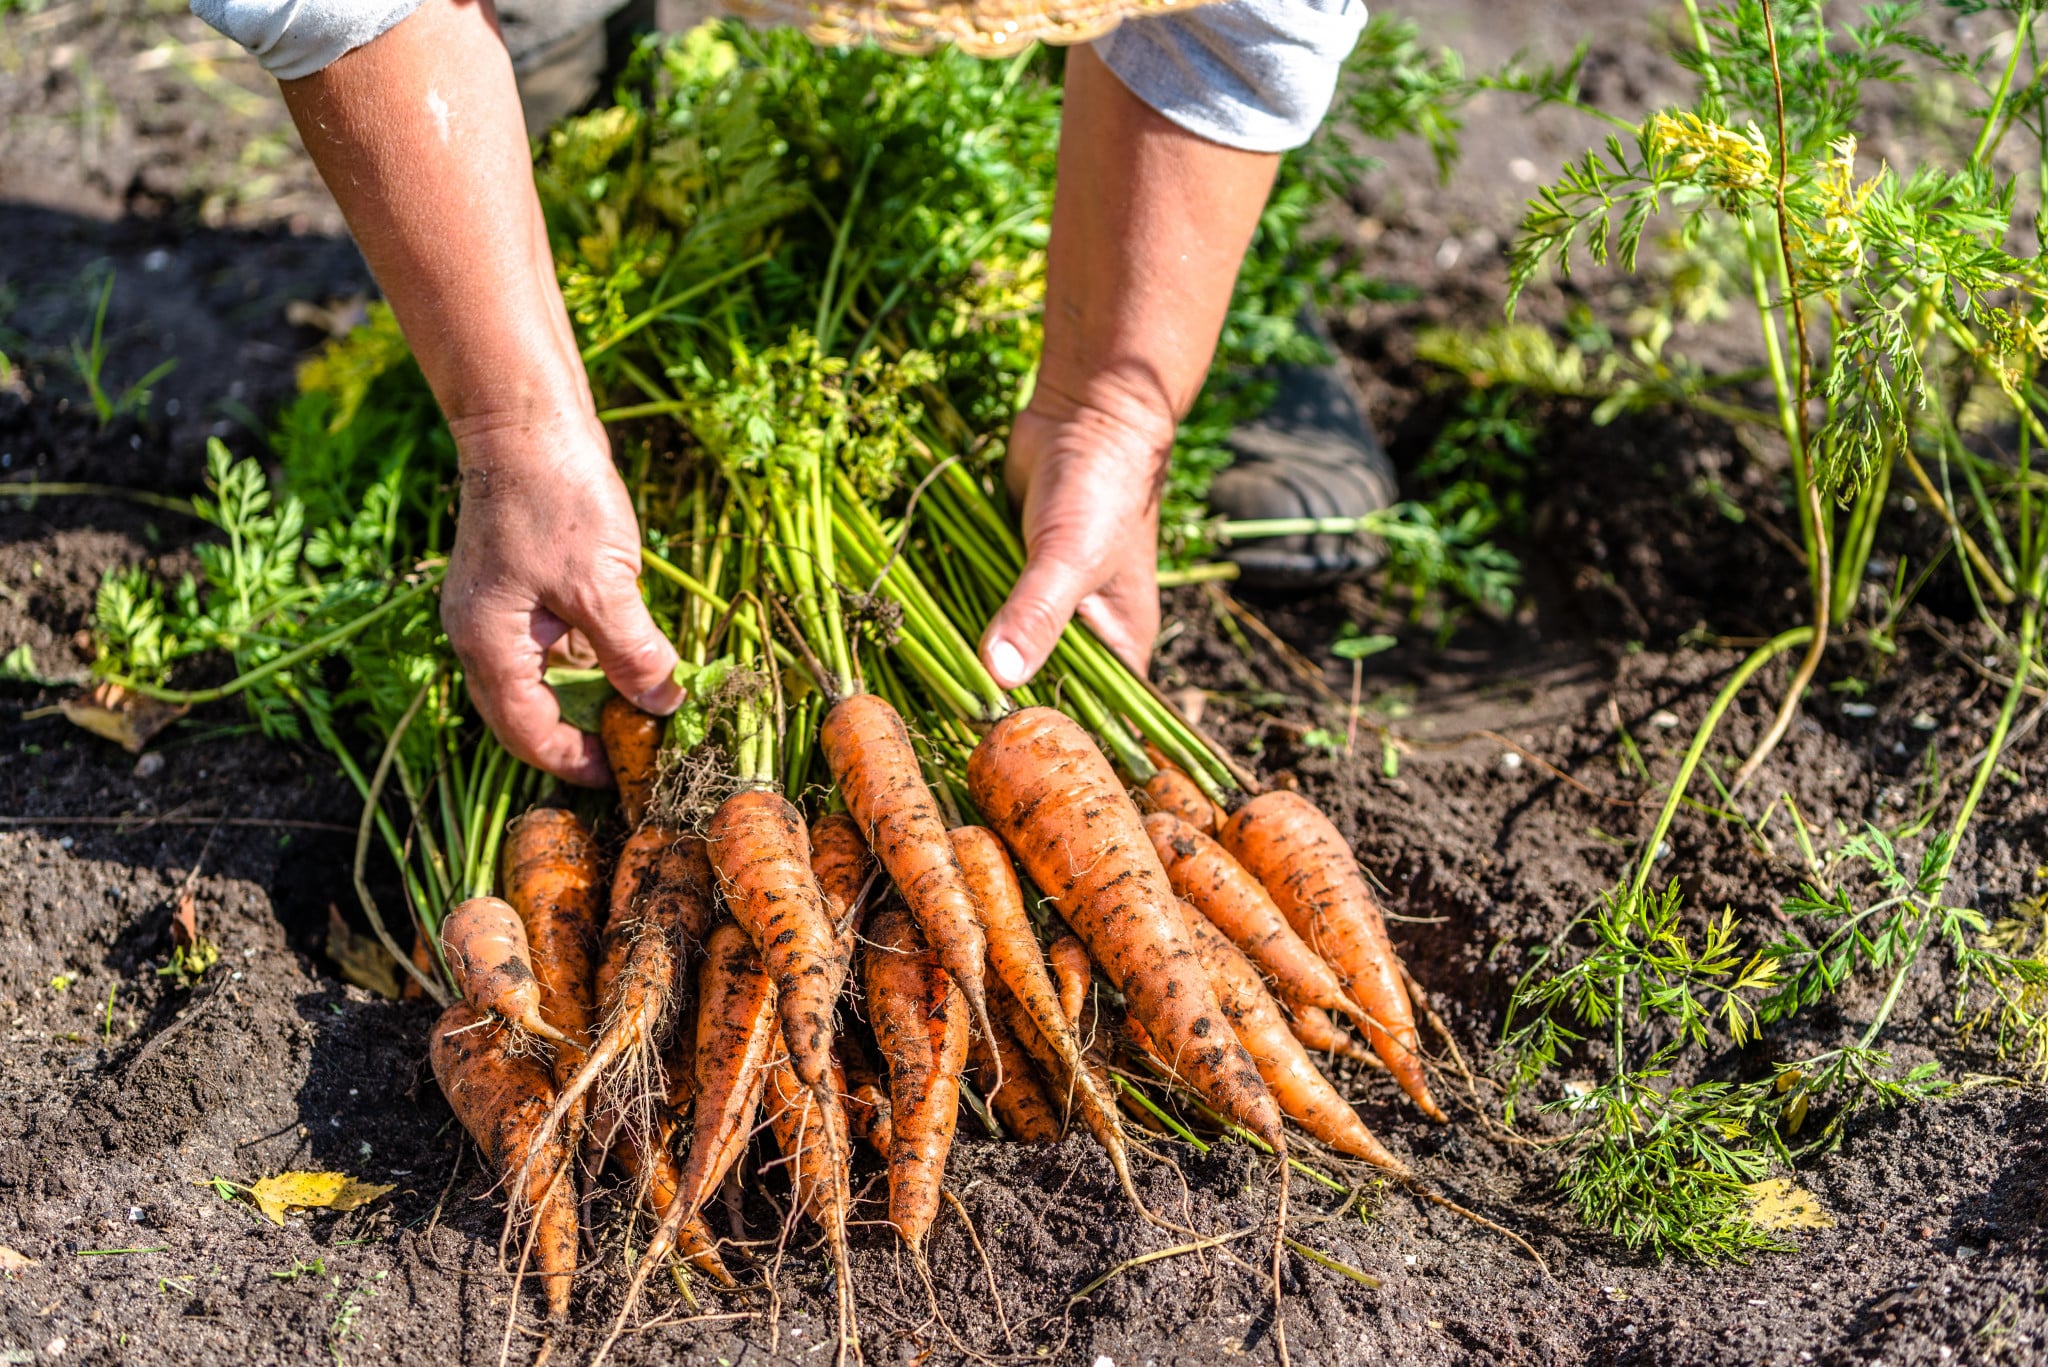 farmer holding carrots, fresh from the ground